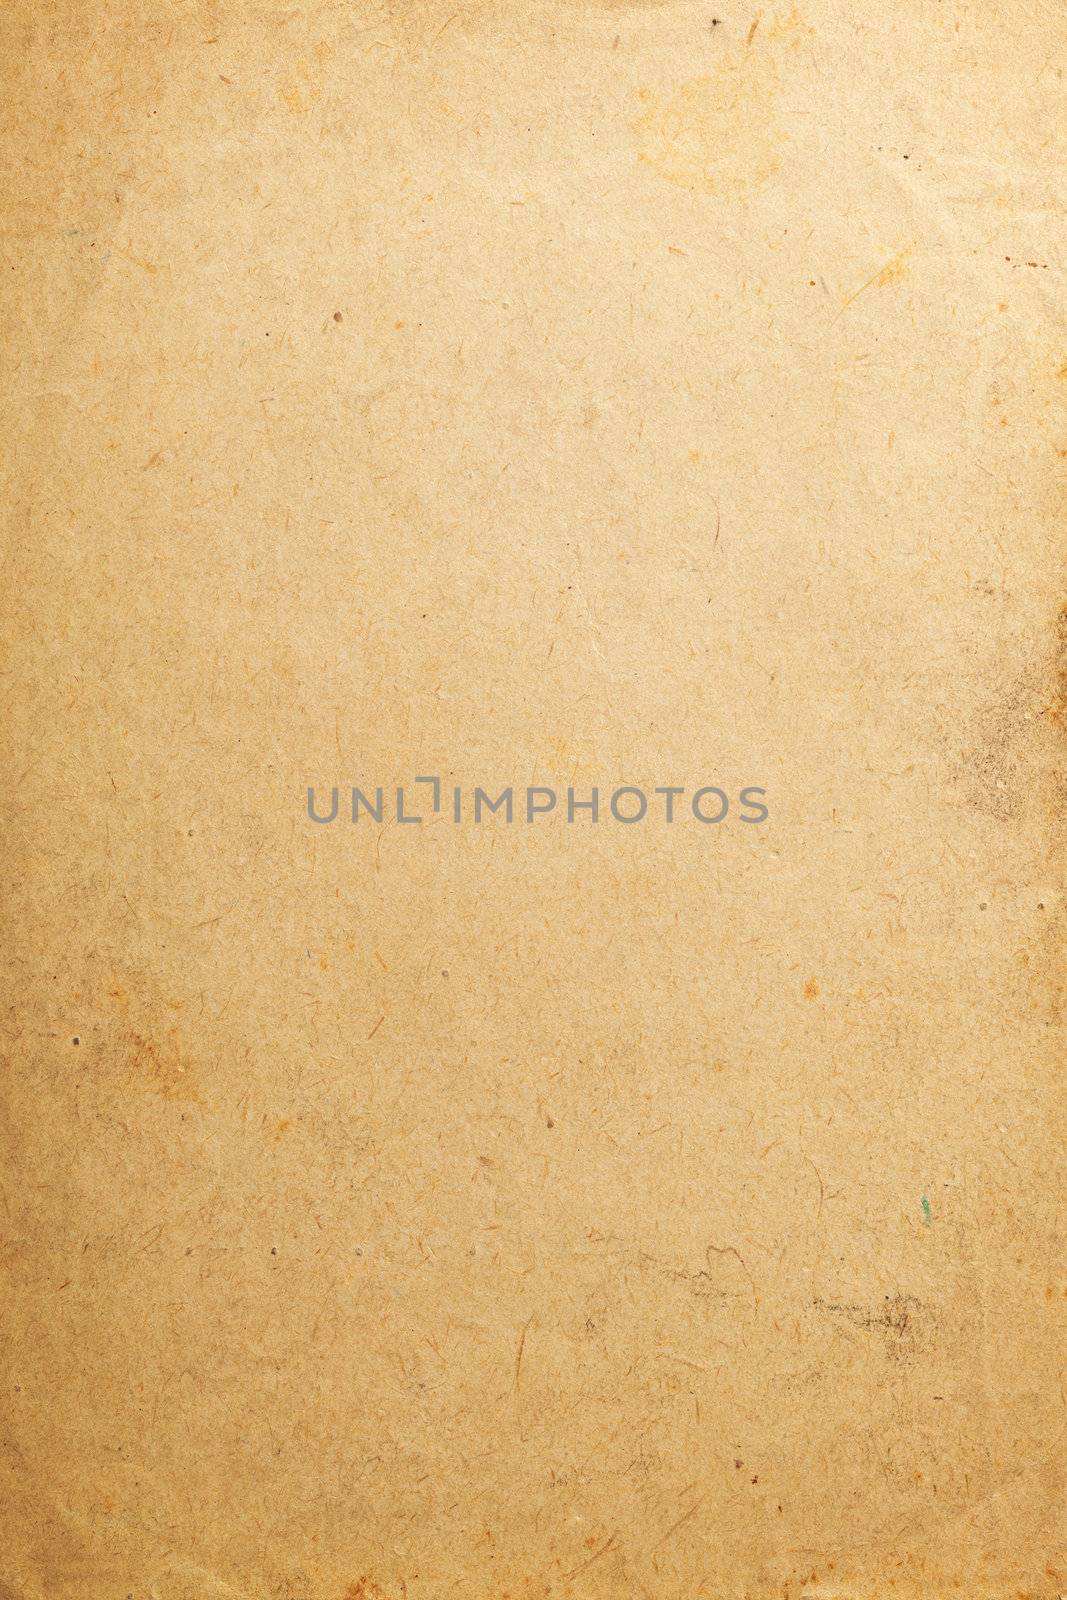 Old paper texture for background, vintage style